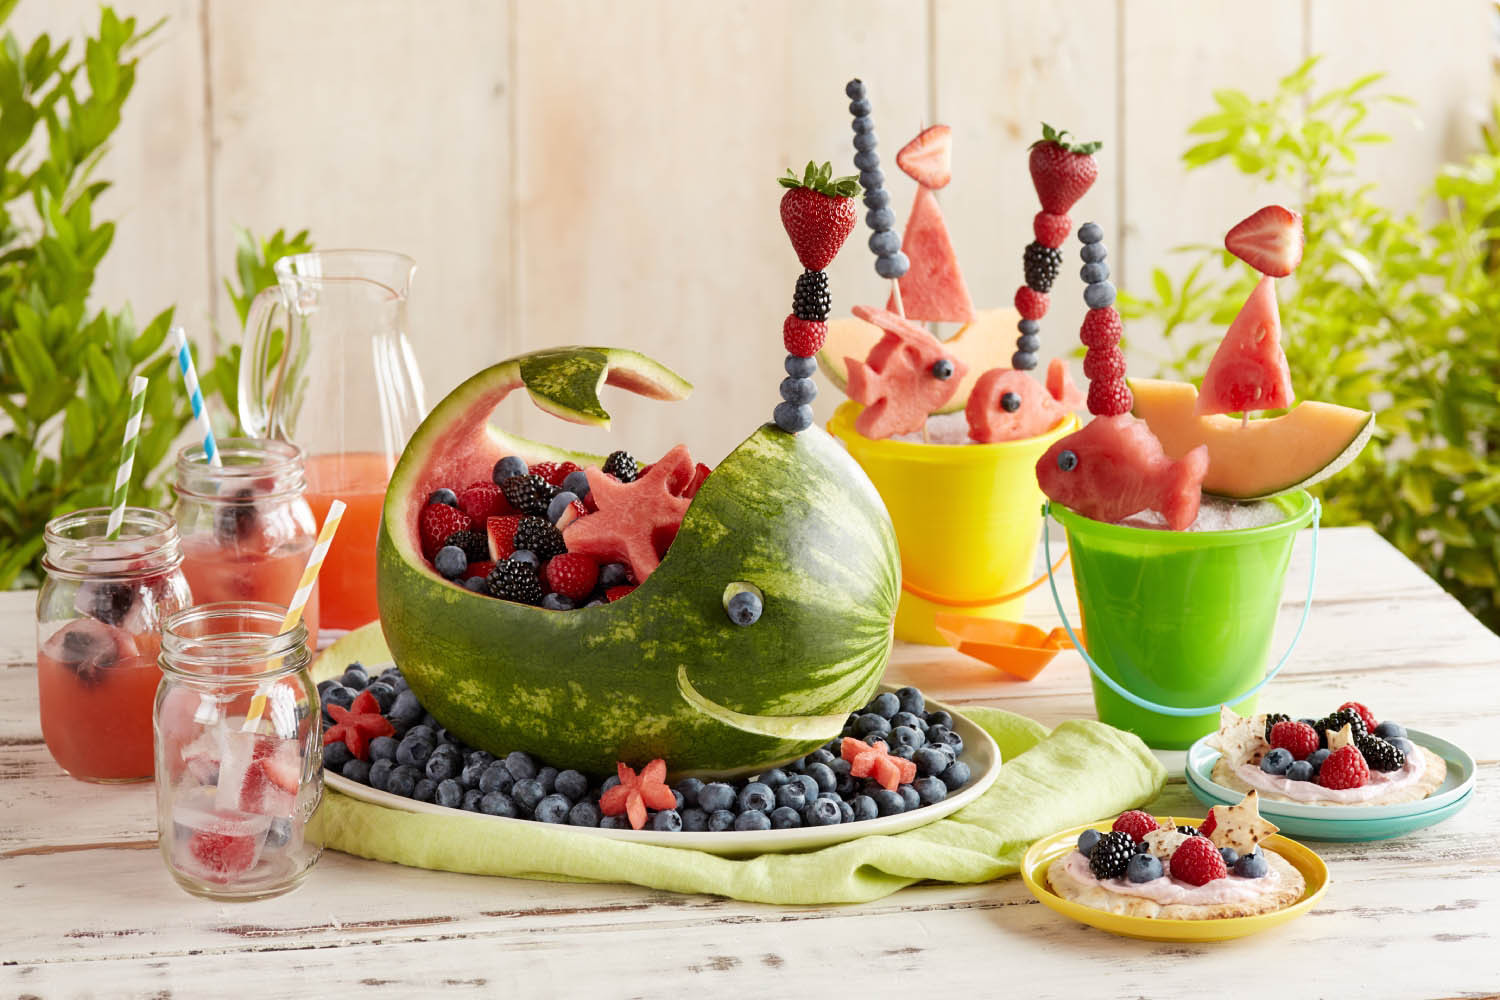 Beach Party Menu Ideas
 Splash into Summer with a Berry Beach Party